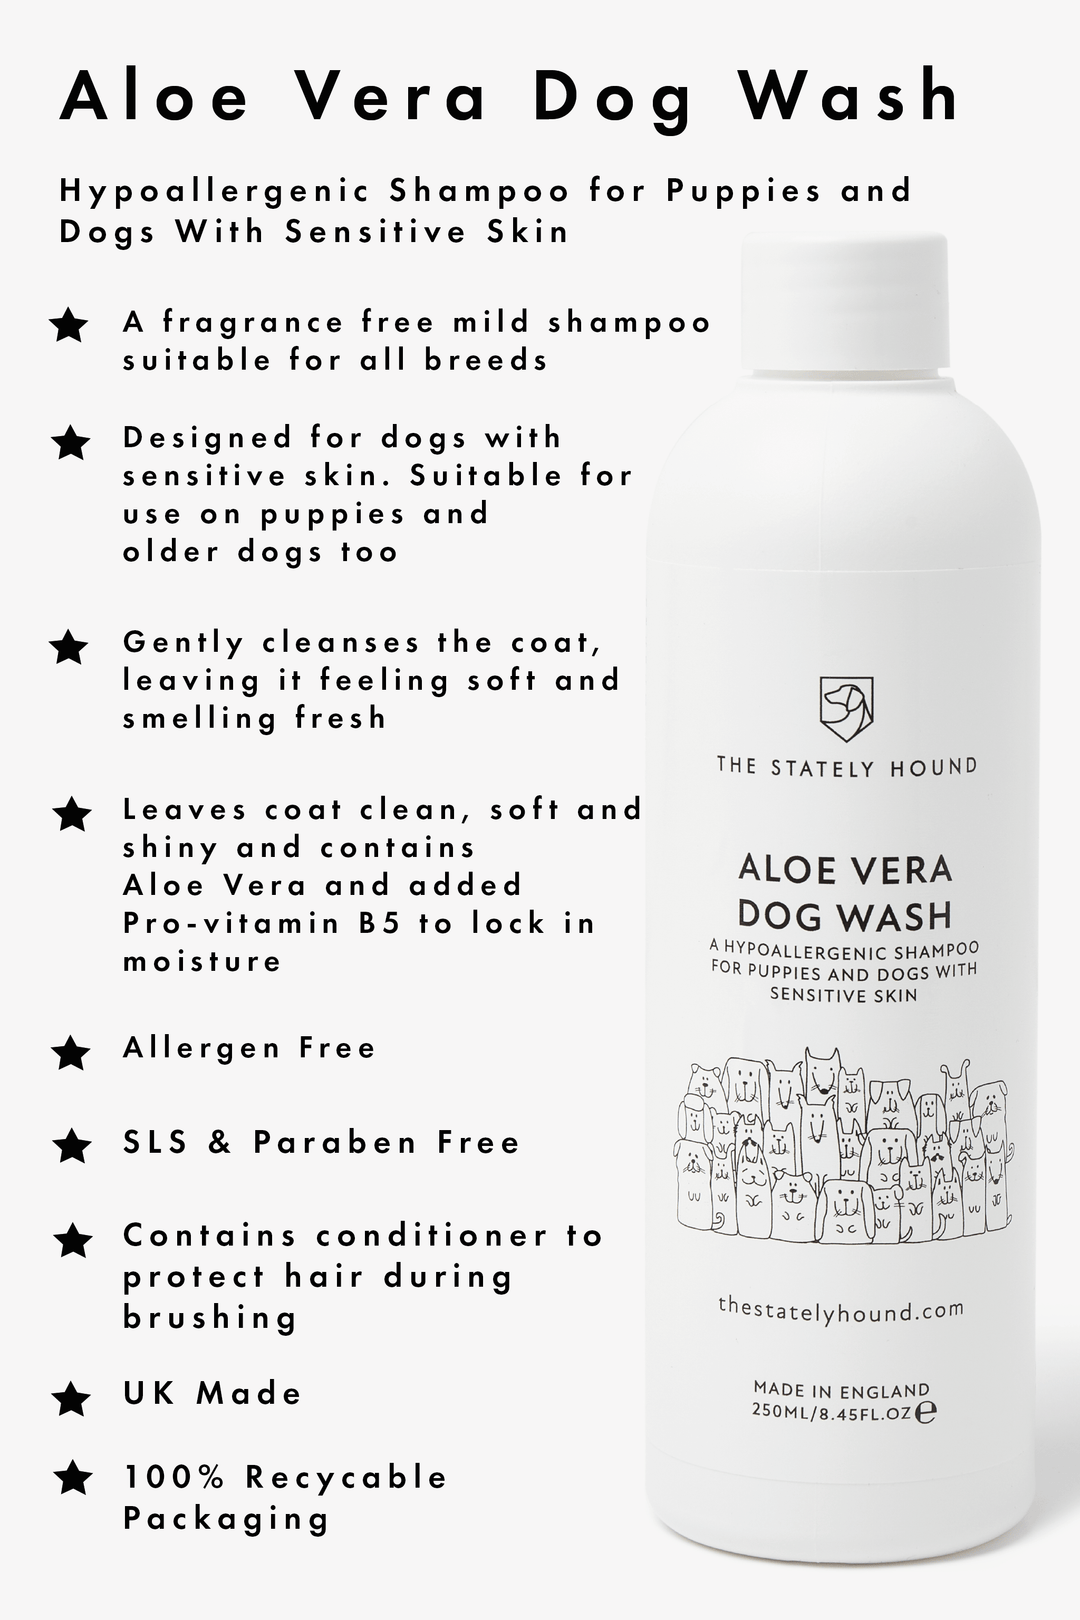 Dog Wash for Puppies and Dogs with Sensitive Skin